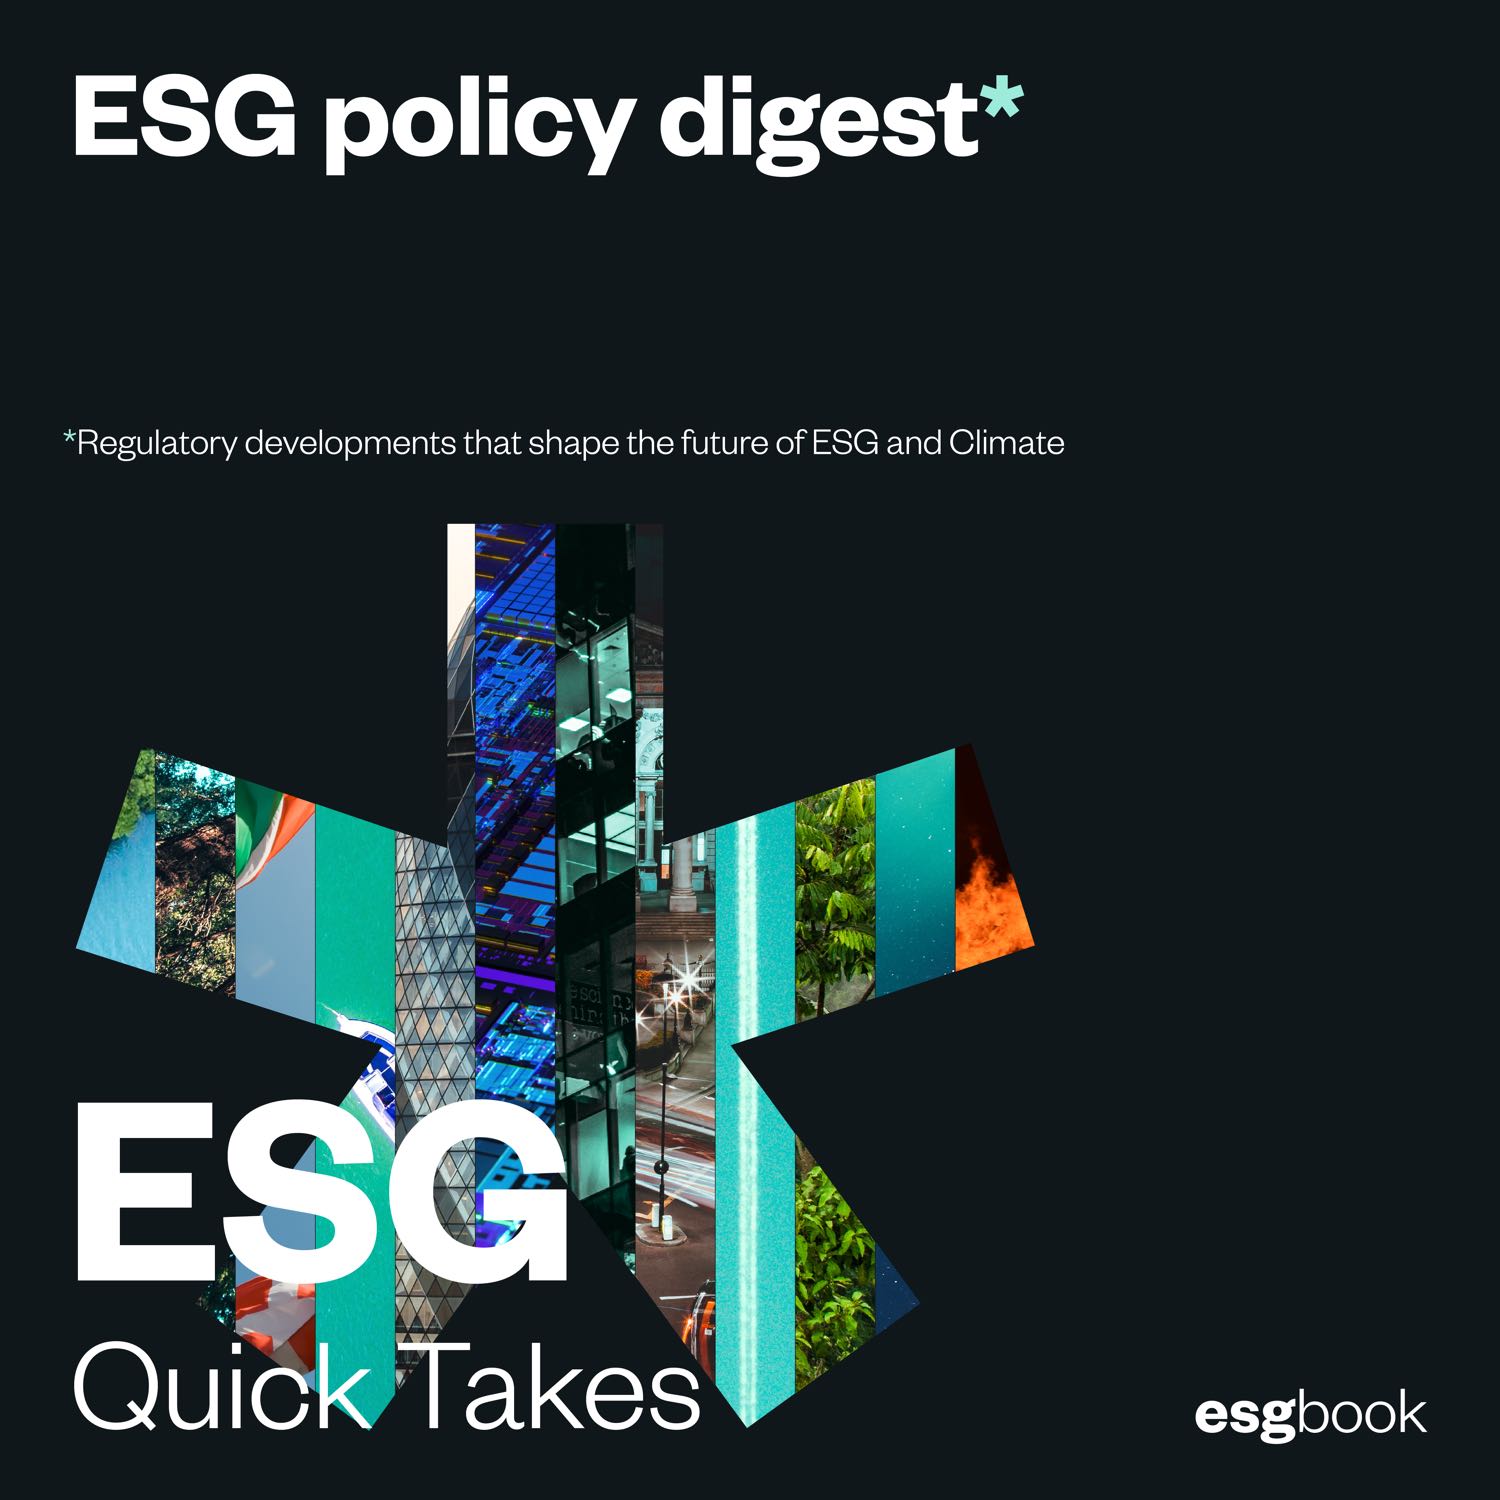 ESG policy digest: Regulatory developments that shape the future of ESG and Climate